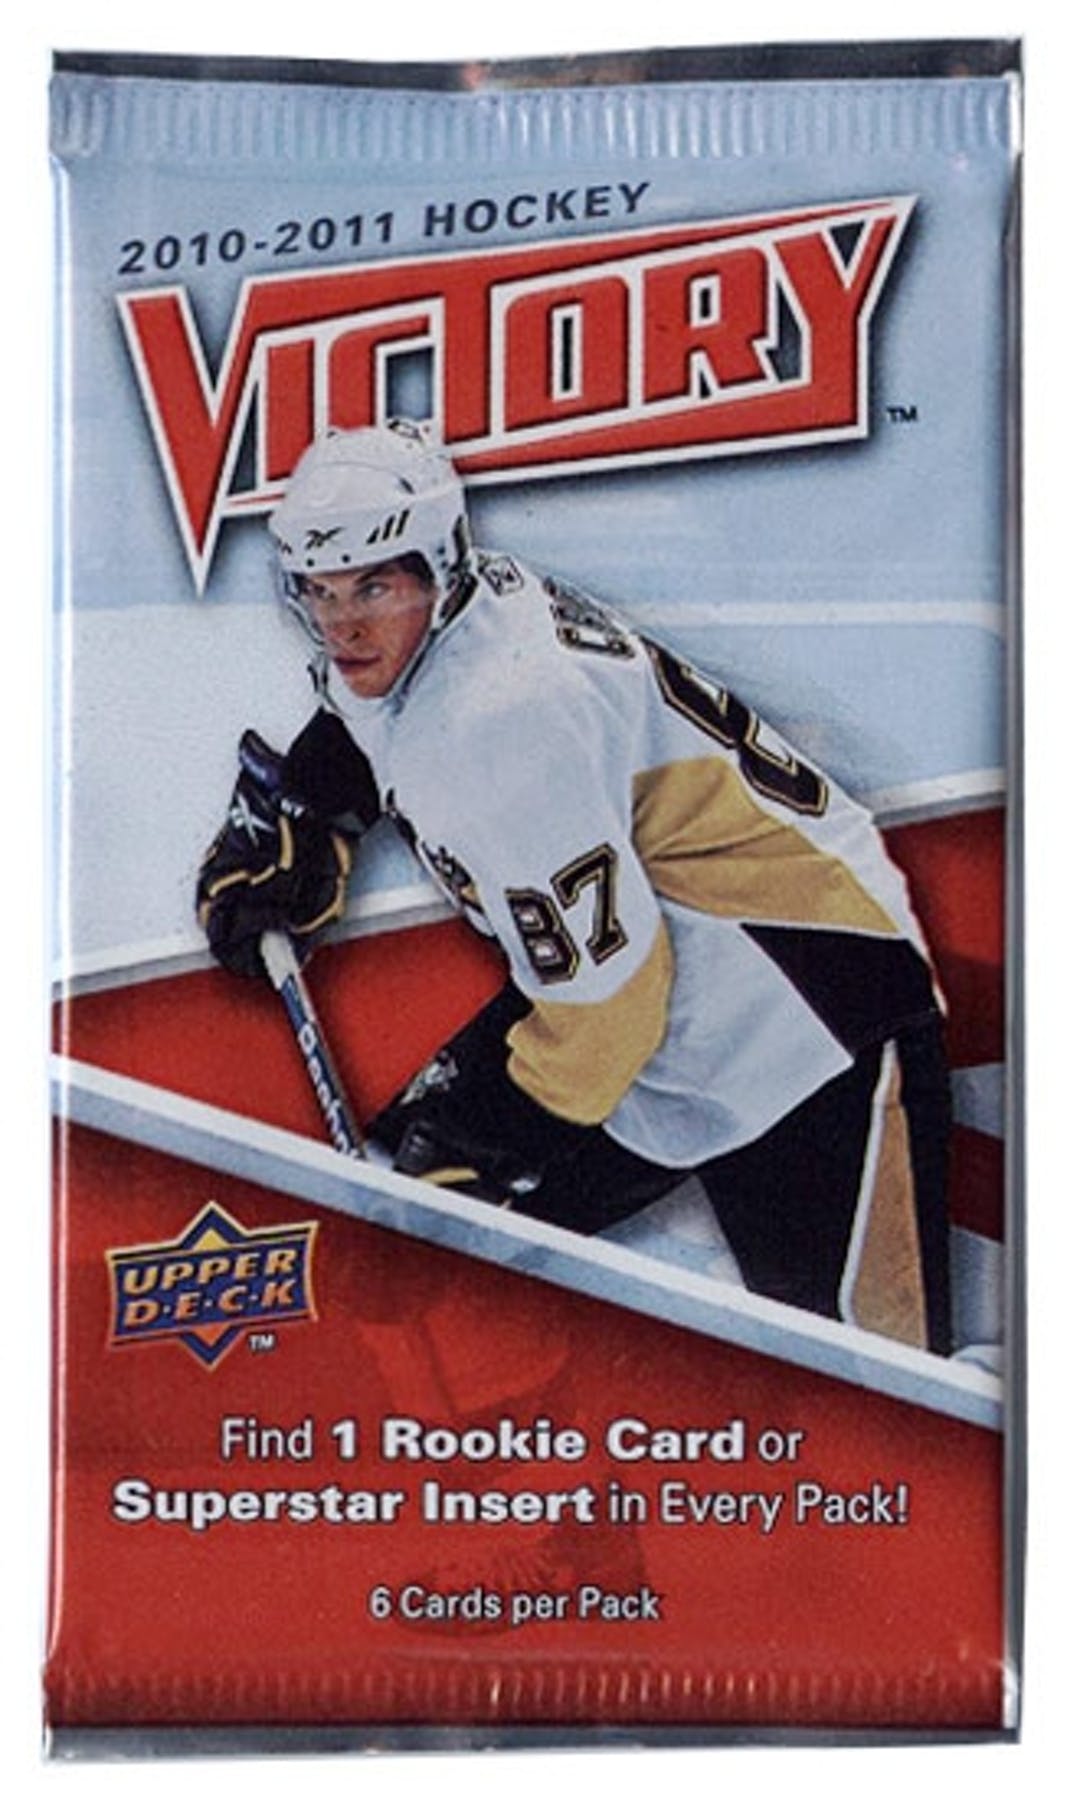 2010-11 Upper Deck Victory (Hobby Pack)